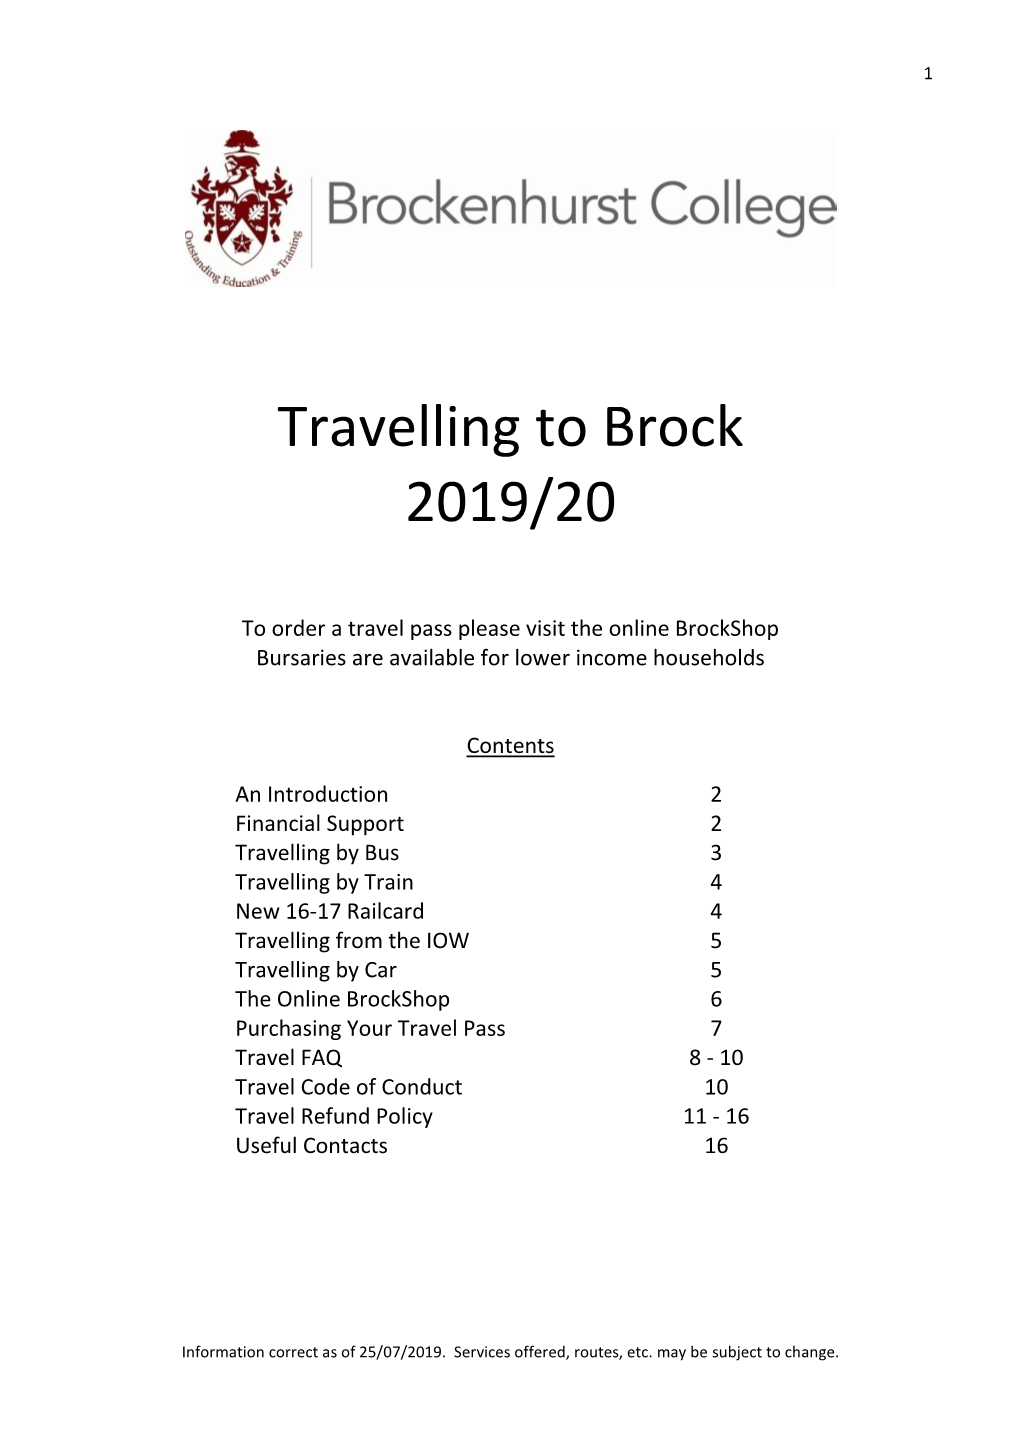 Travelling to Brock 2019/20